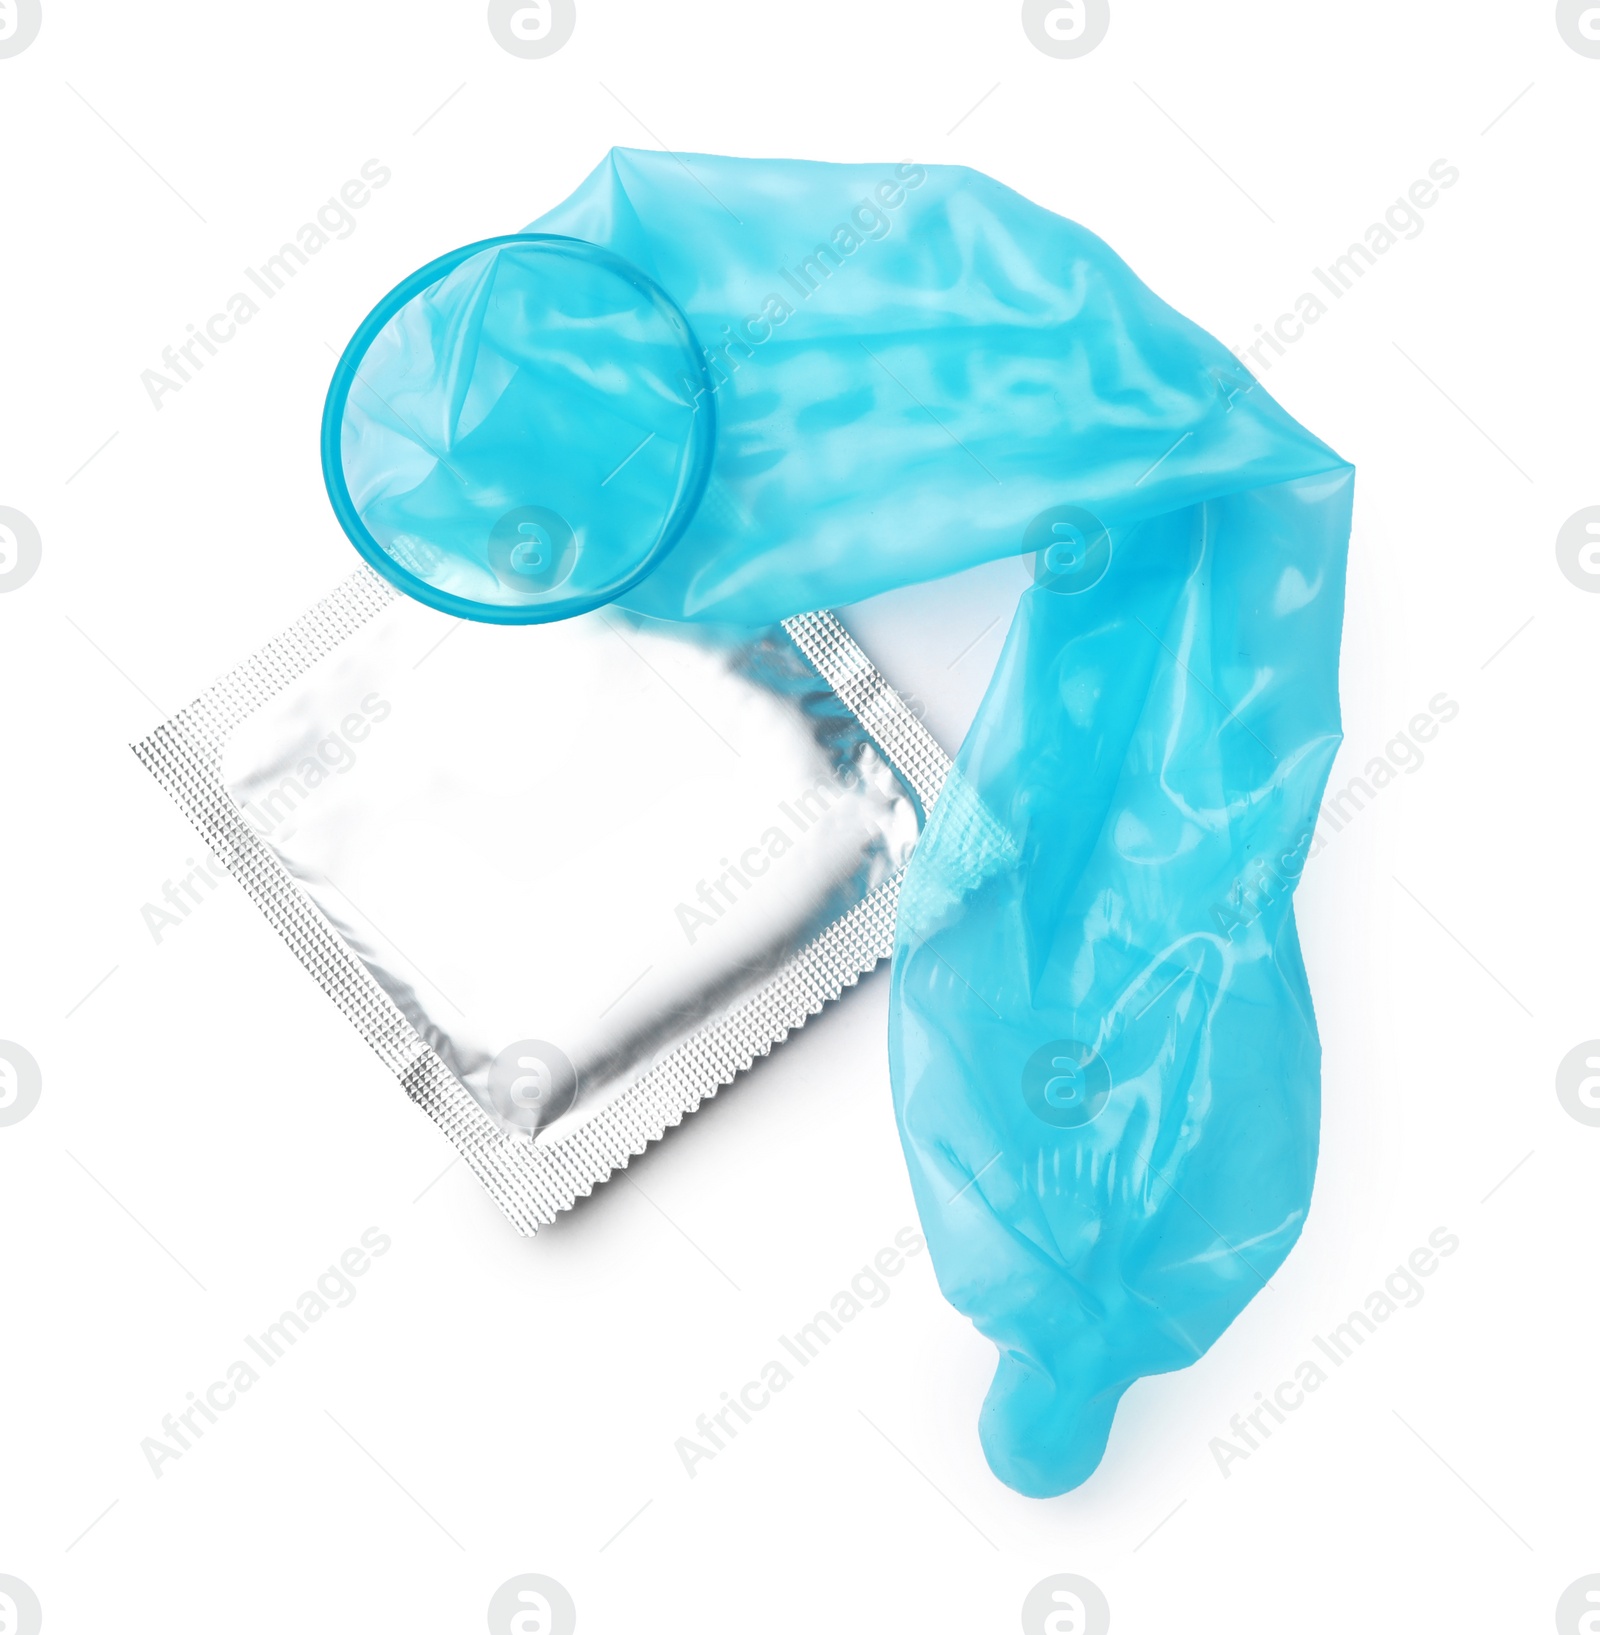 Image of Unrolled light blue condom and package on white background, top view. Safe sex